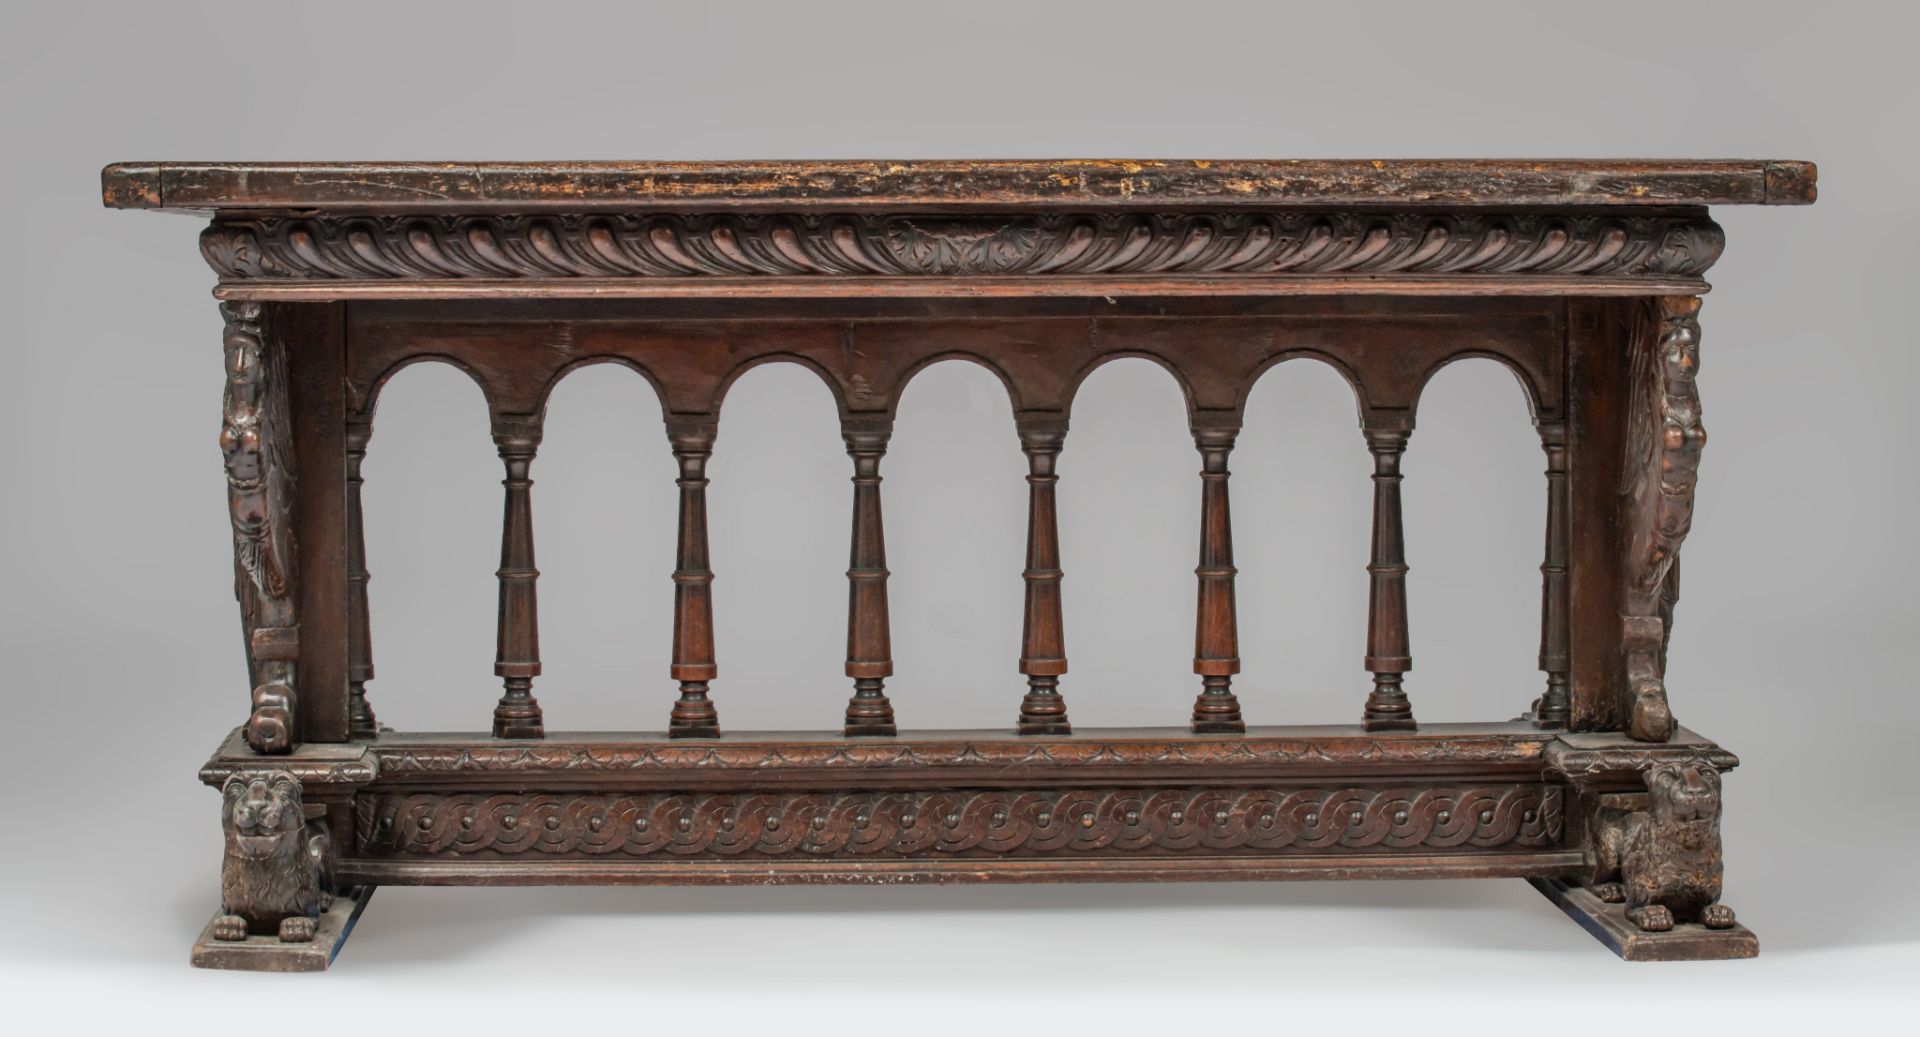 An exceptional Italian Renaissance carved walnut centre table, 16th/17thC, H 82 - W 165 - D 86,5 cm - Image 3 of 12